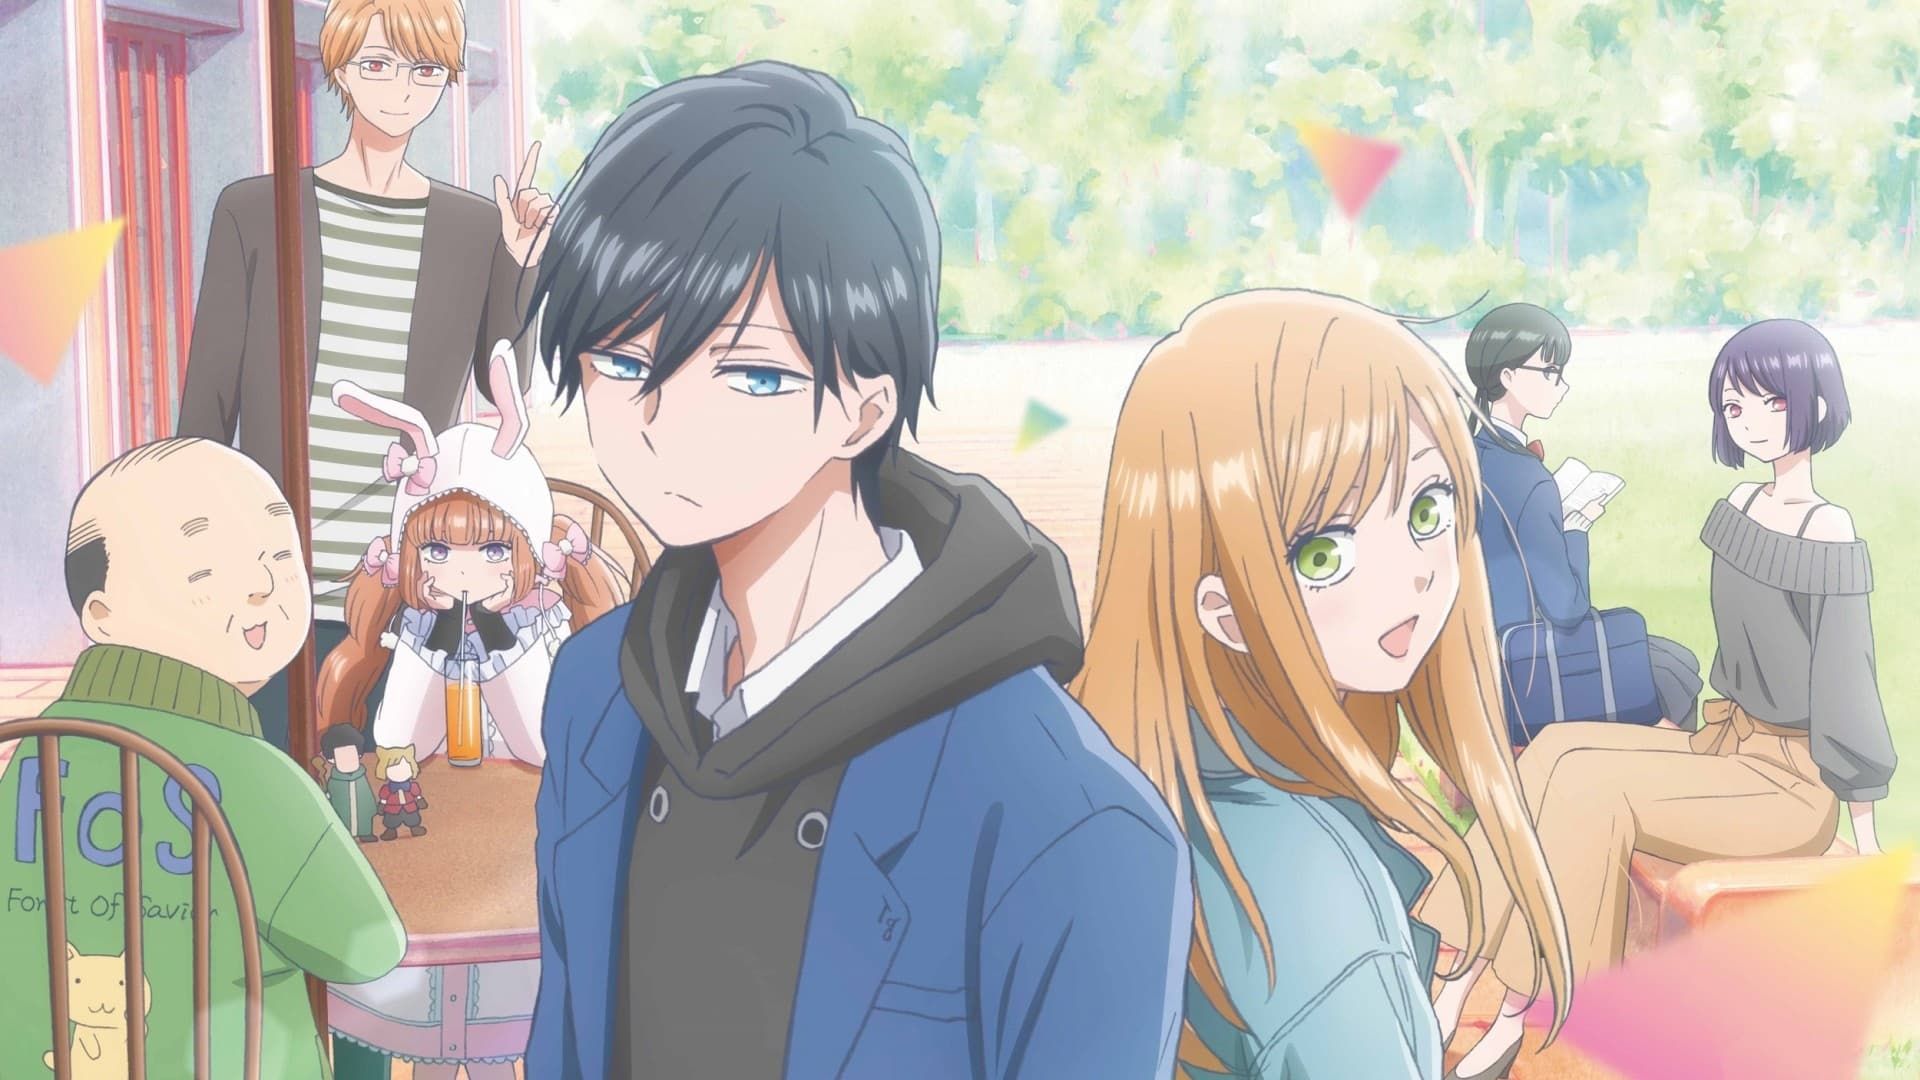 My Love Story with Yamada-kun at Lv999 episode 5 release date, where to  watch, what to expect, countdown, and more